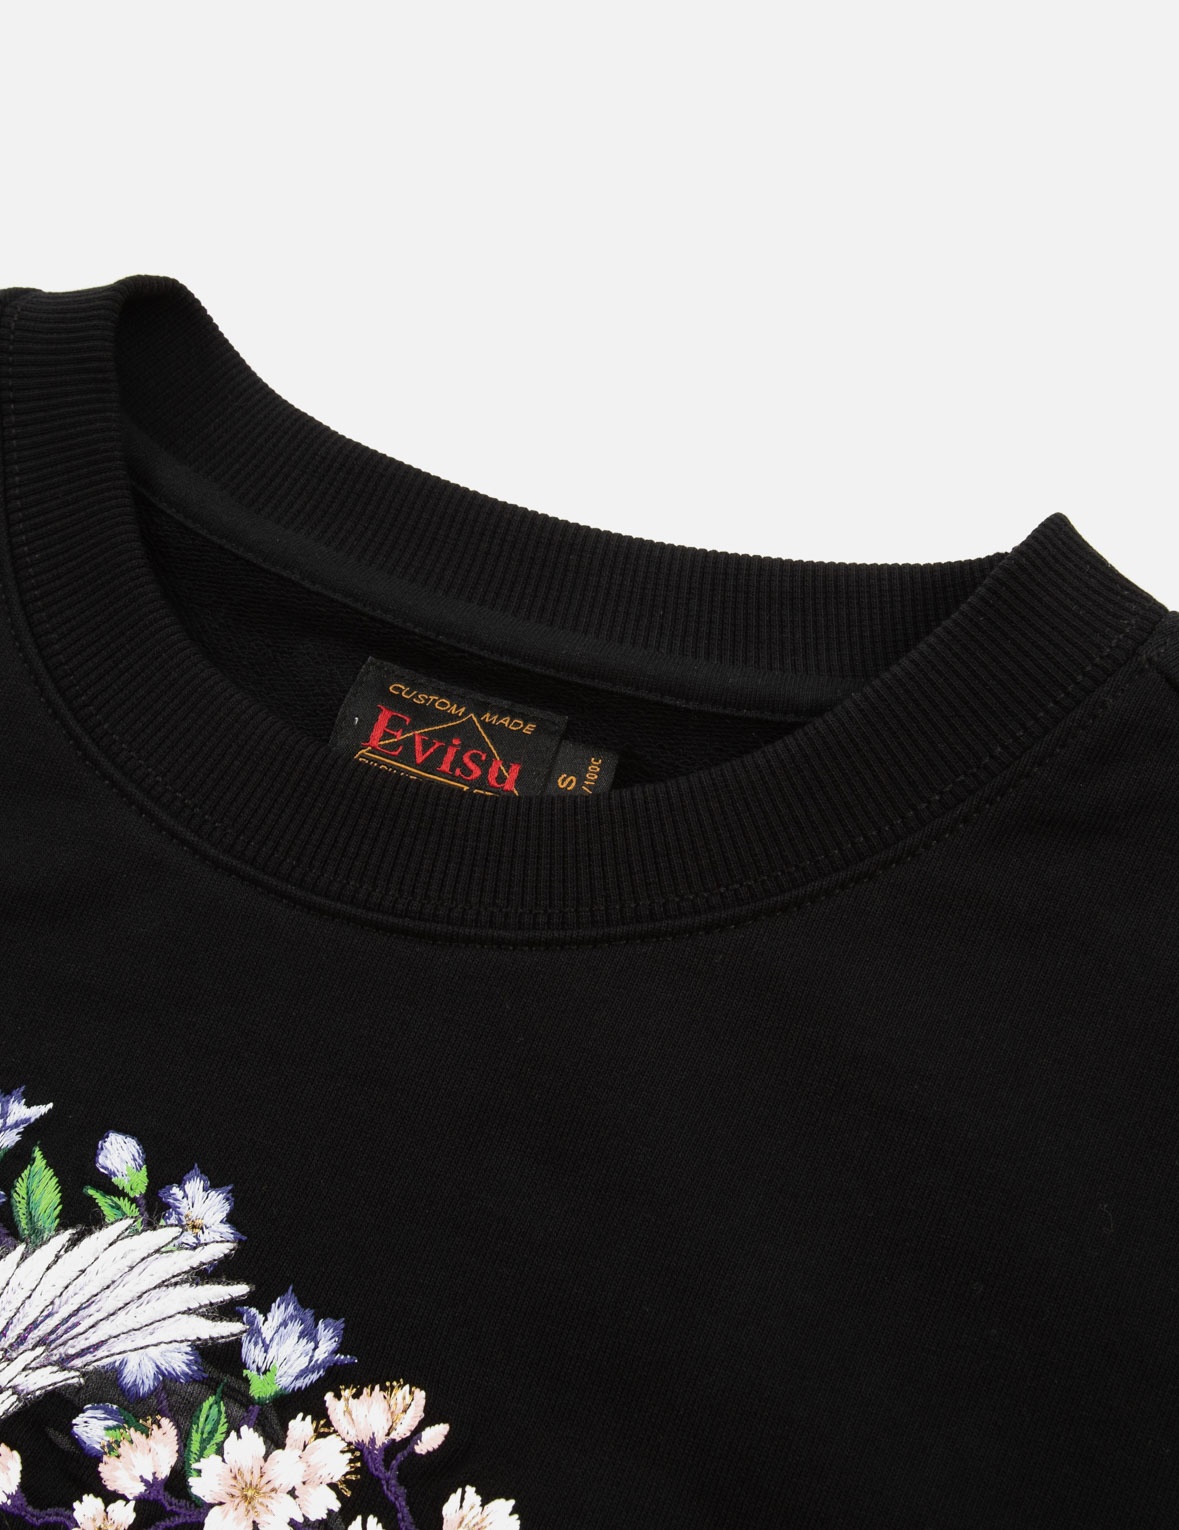 CRANES AND FLORAL EMBROIDERY WITH LOGO PRINT OVERSIZED SWEATSHIRT - 9